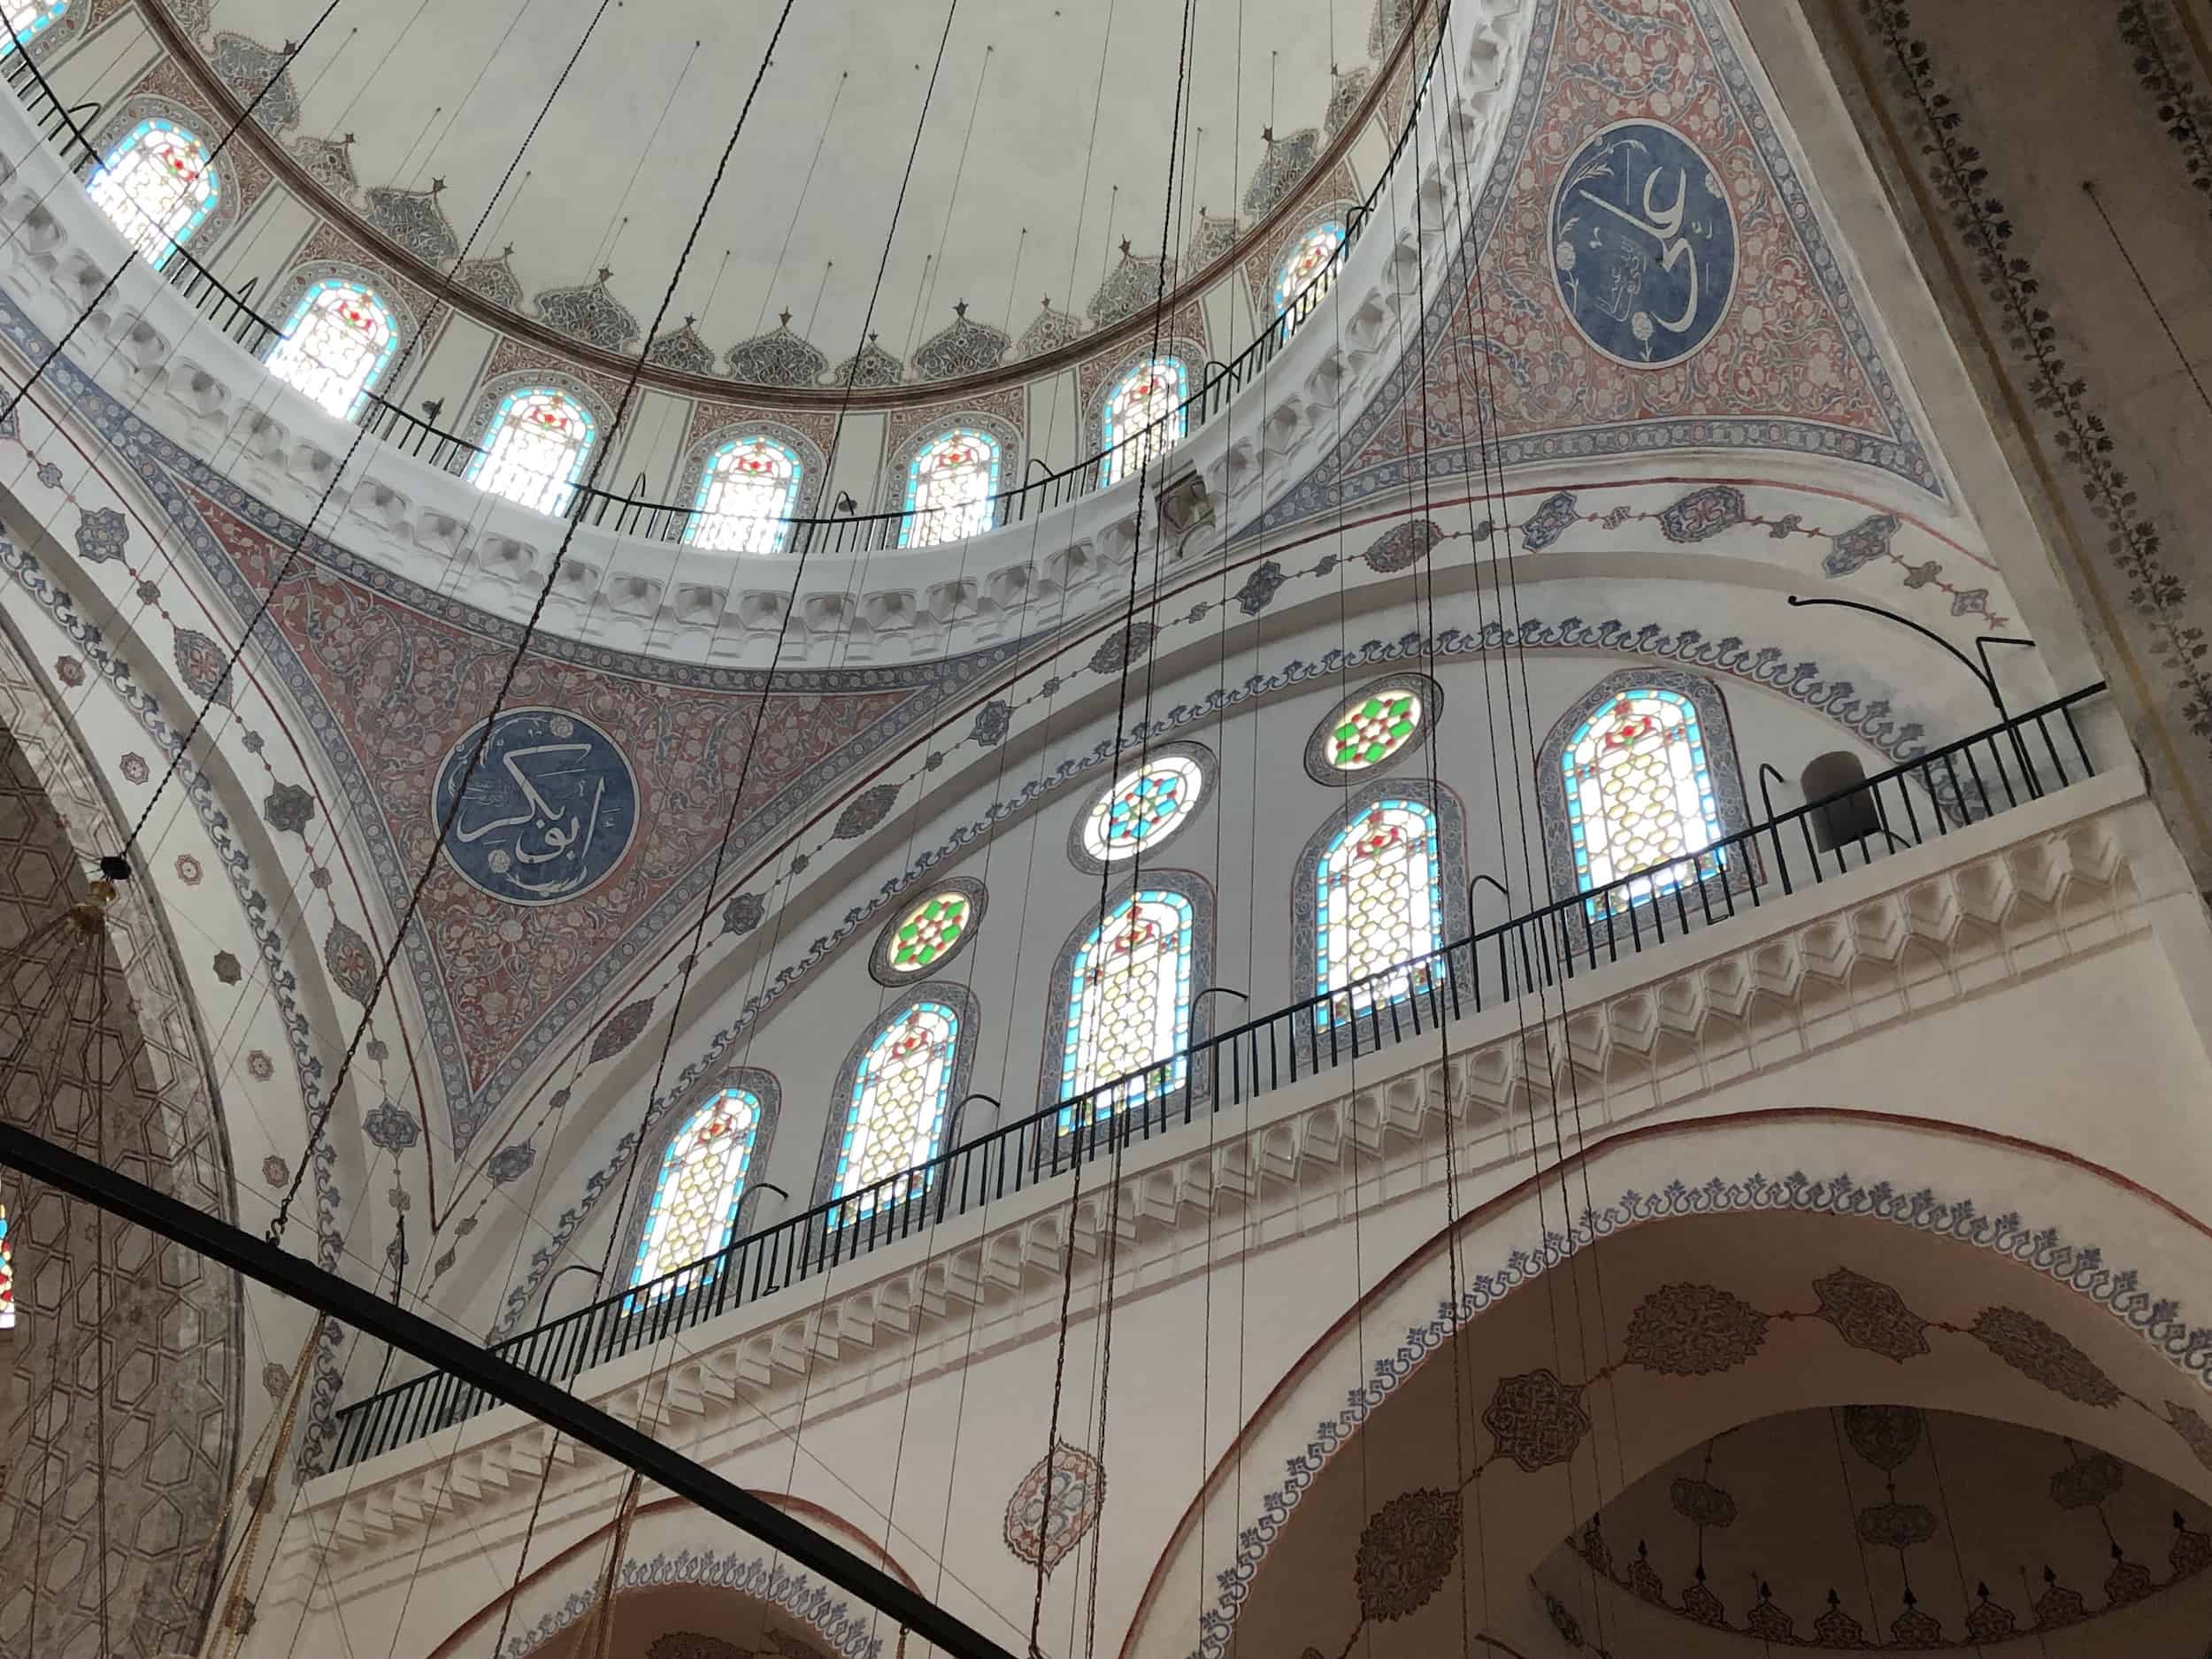 Supporting arch with windows of the Bayezid II Mosque in Istanbul, Turkey